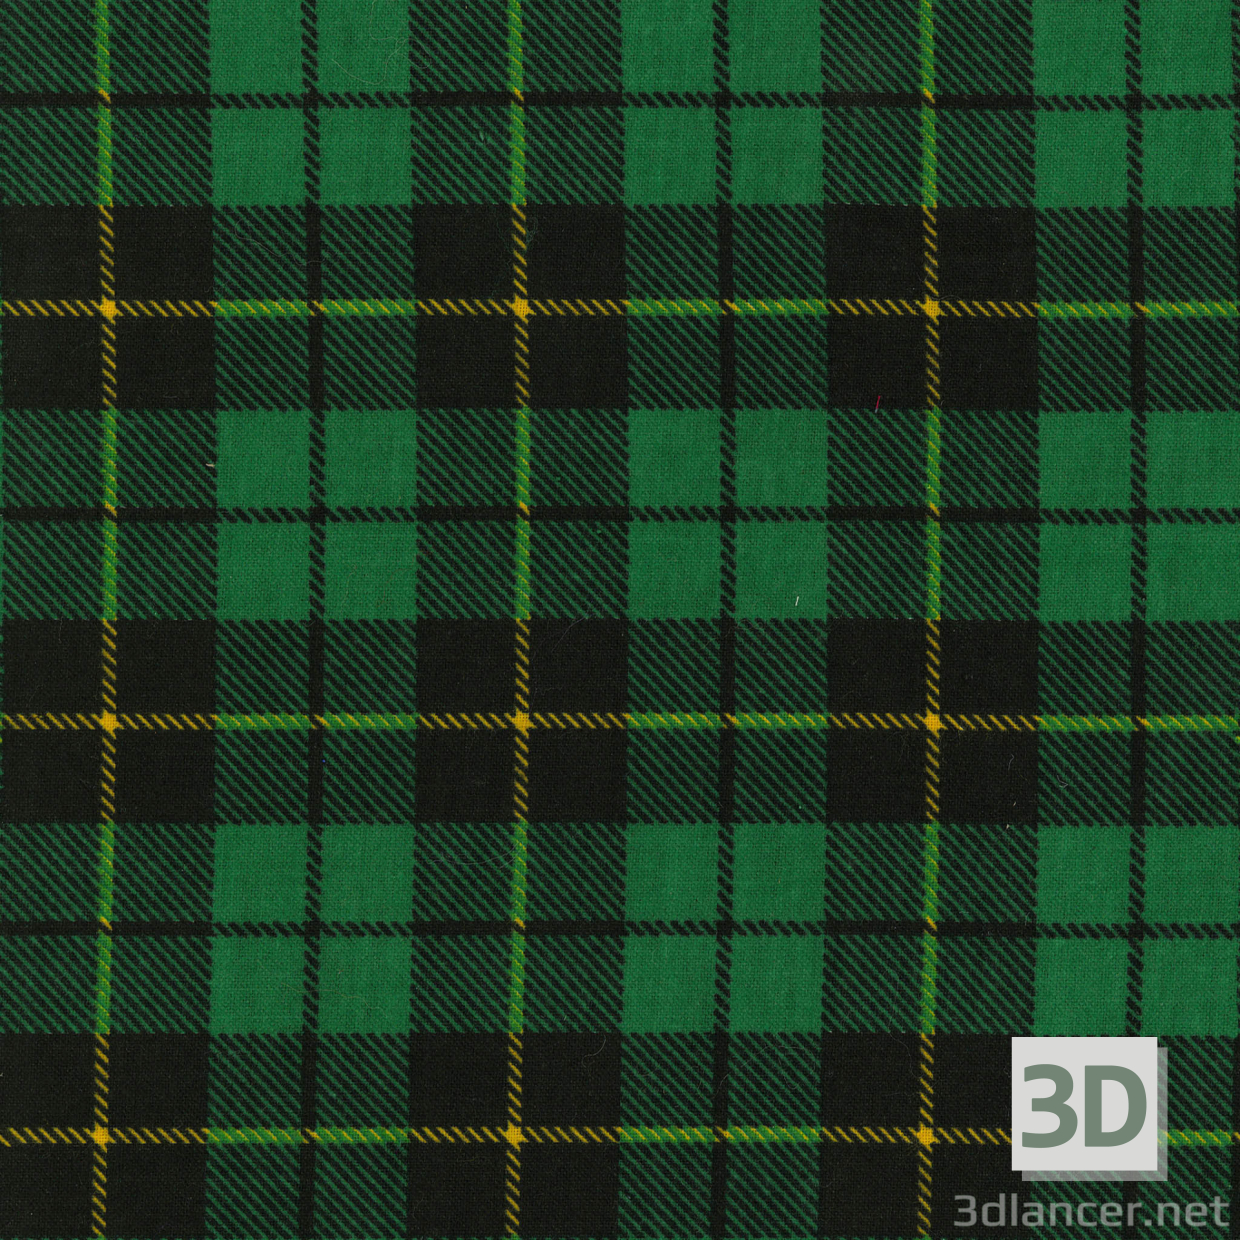 Texture plaid 08 free download - image